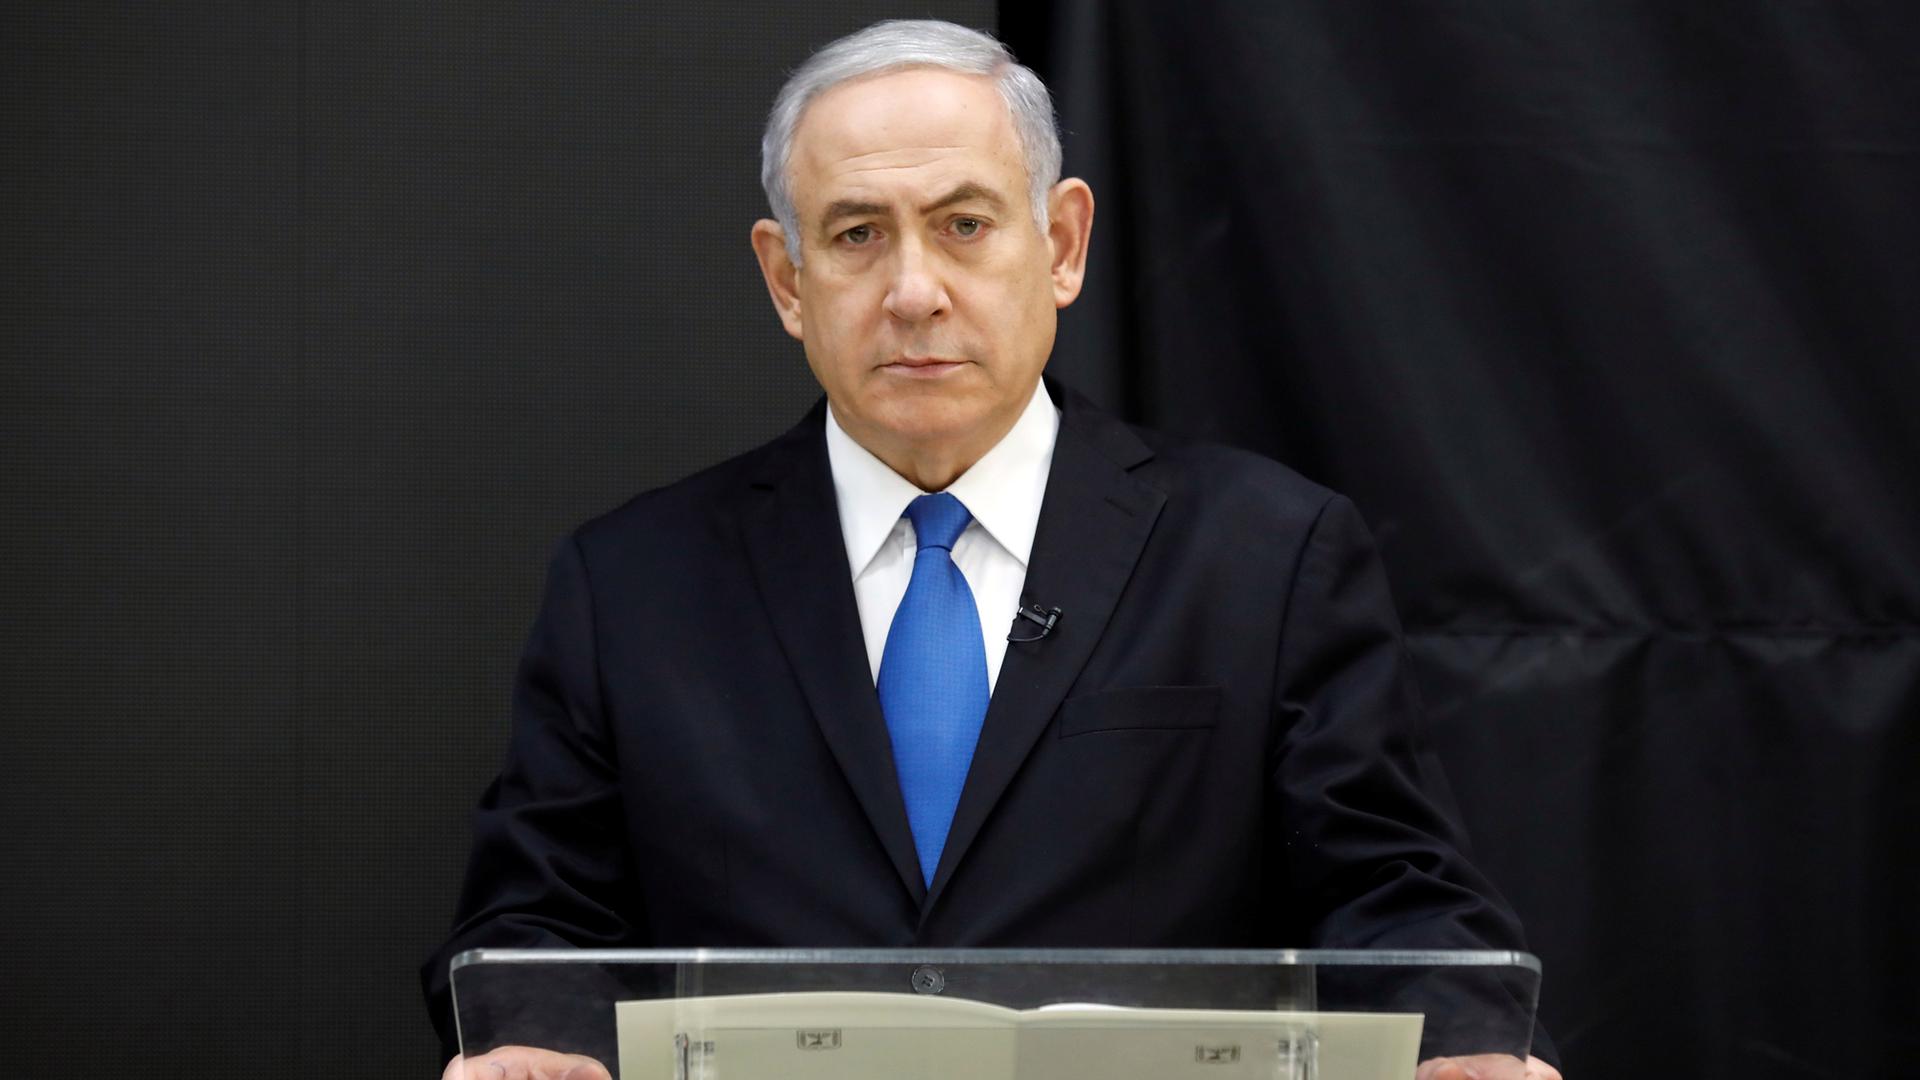 Israeli Prime Minister Benjamin Netanyahu stands at a podium speaking during a news conference in Tel Aviv.